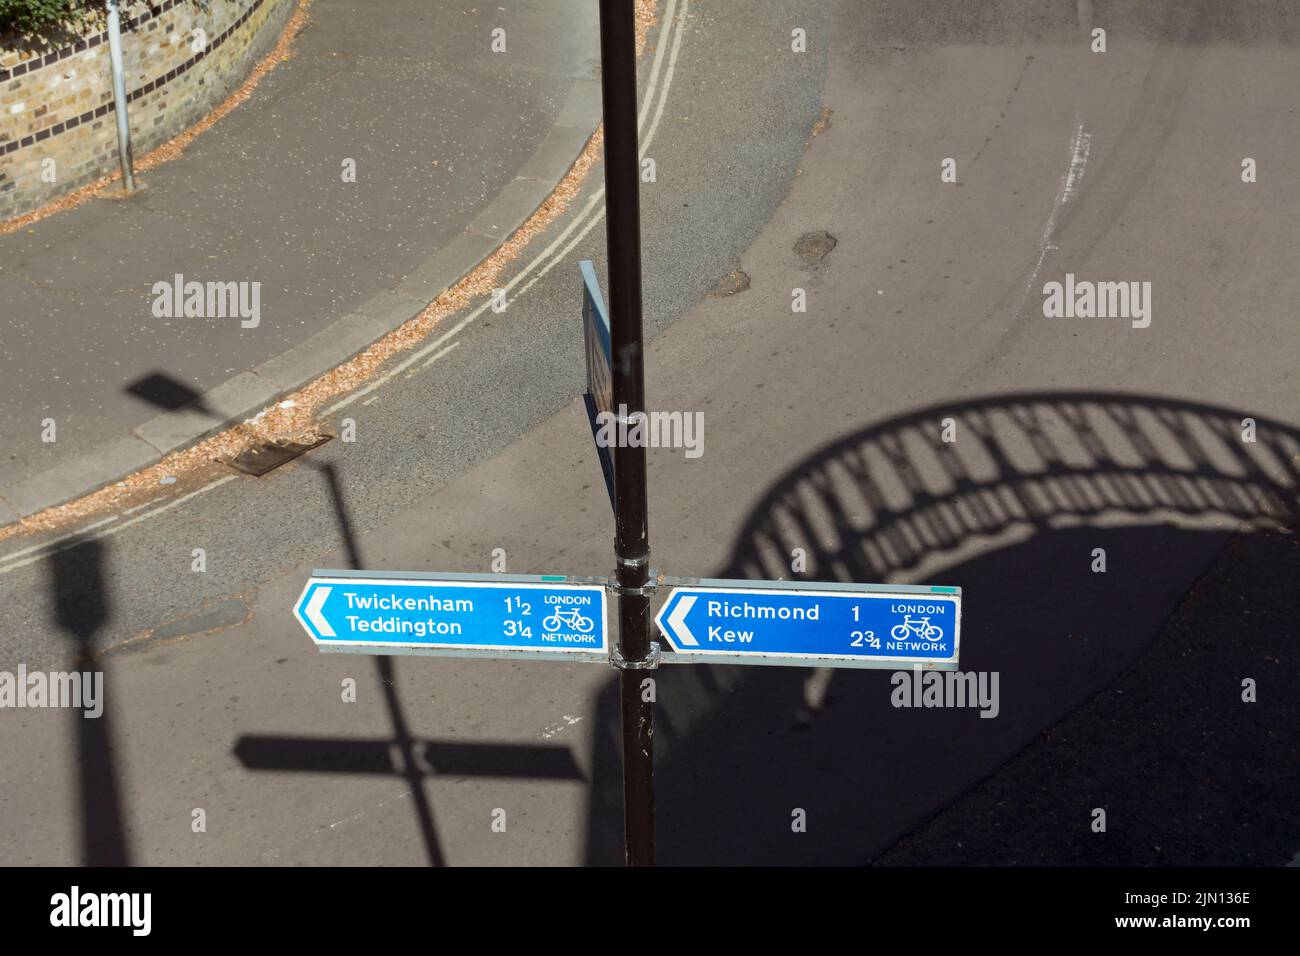 with the shadow of twickenham bridge in the background, cycle route direction signs for twickenham, teddington, richmond and kew, london, england Stock Photo